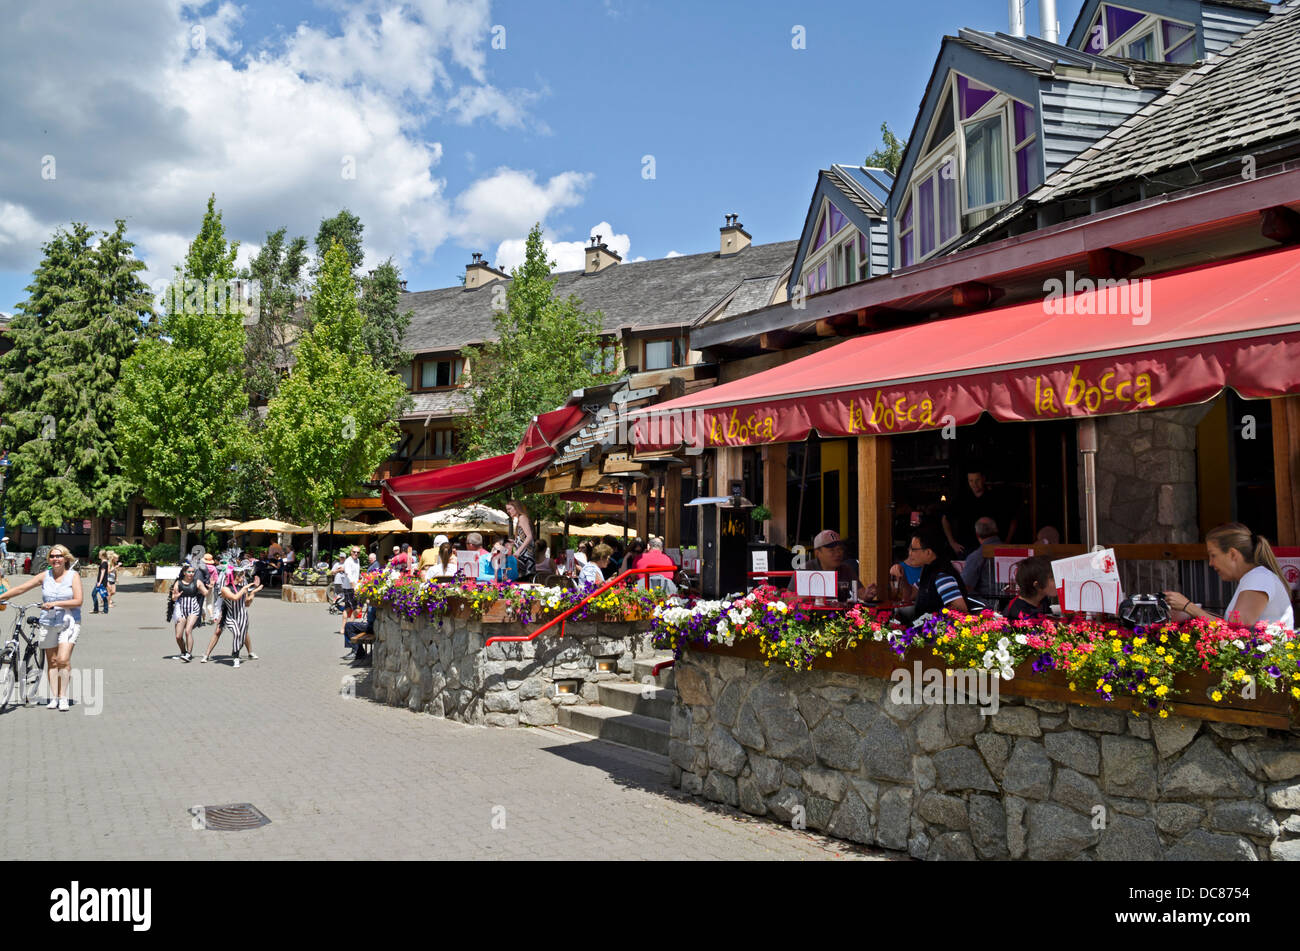 People walking and dining in Whistler village in the summer.  People eating at cafés on patios. In Whistler, British Columbia. Stock Photo